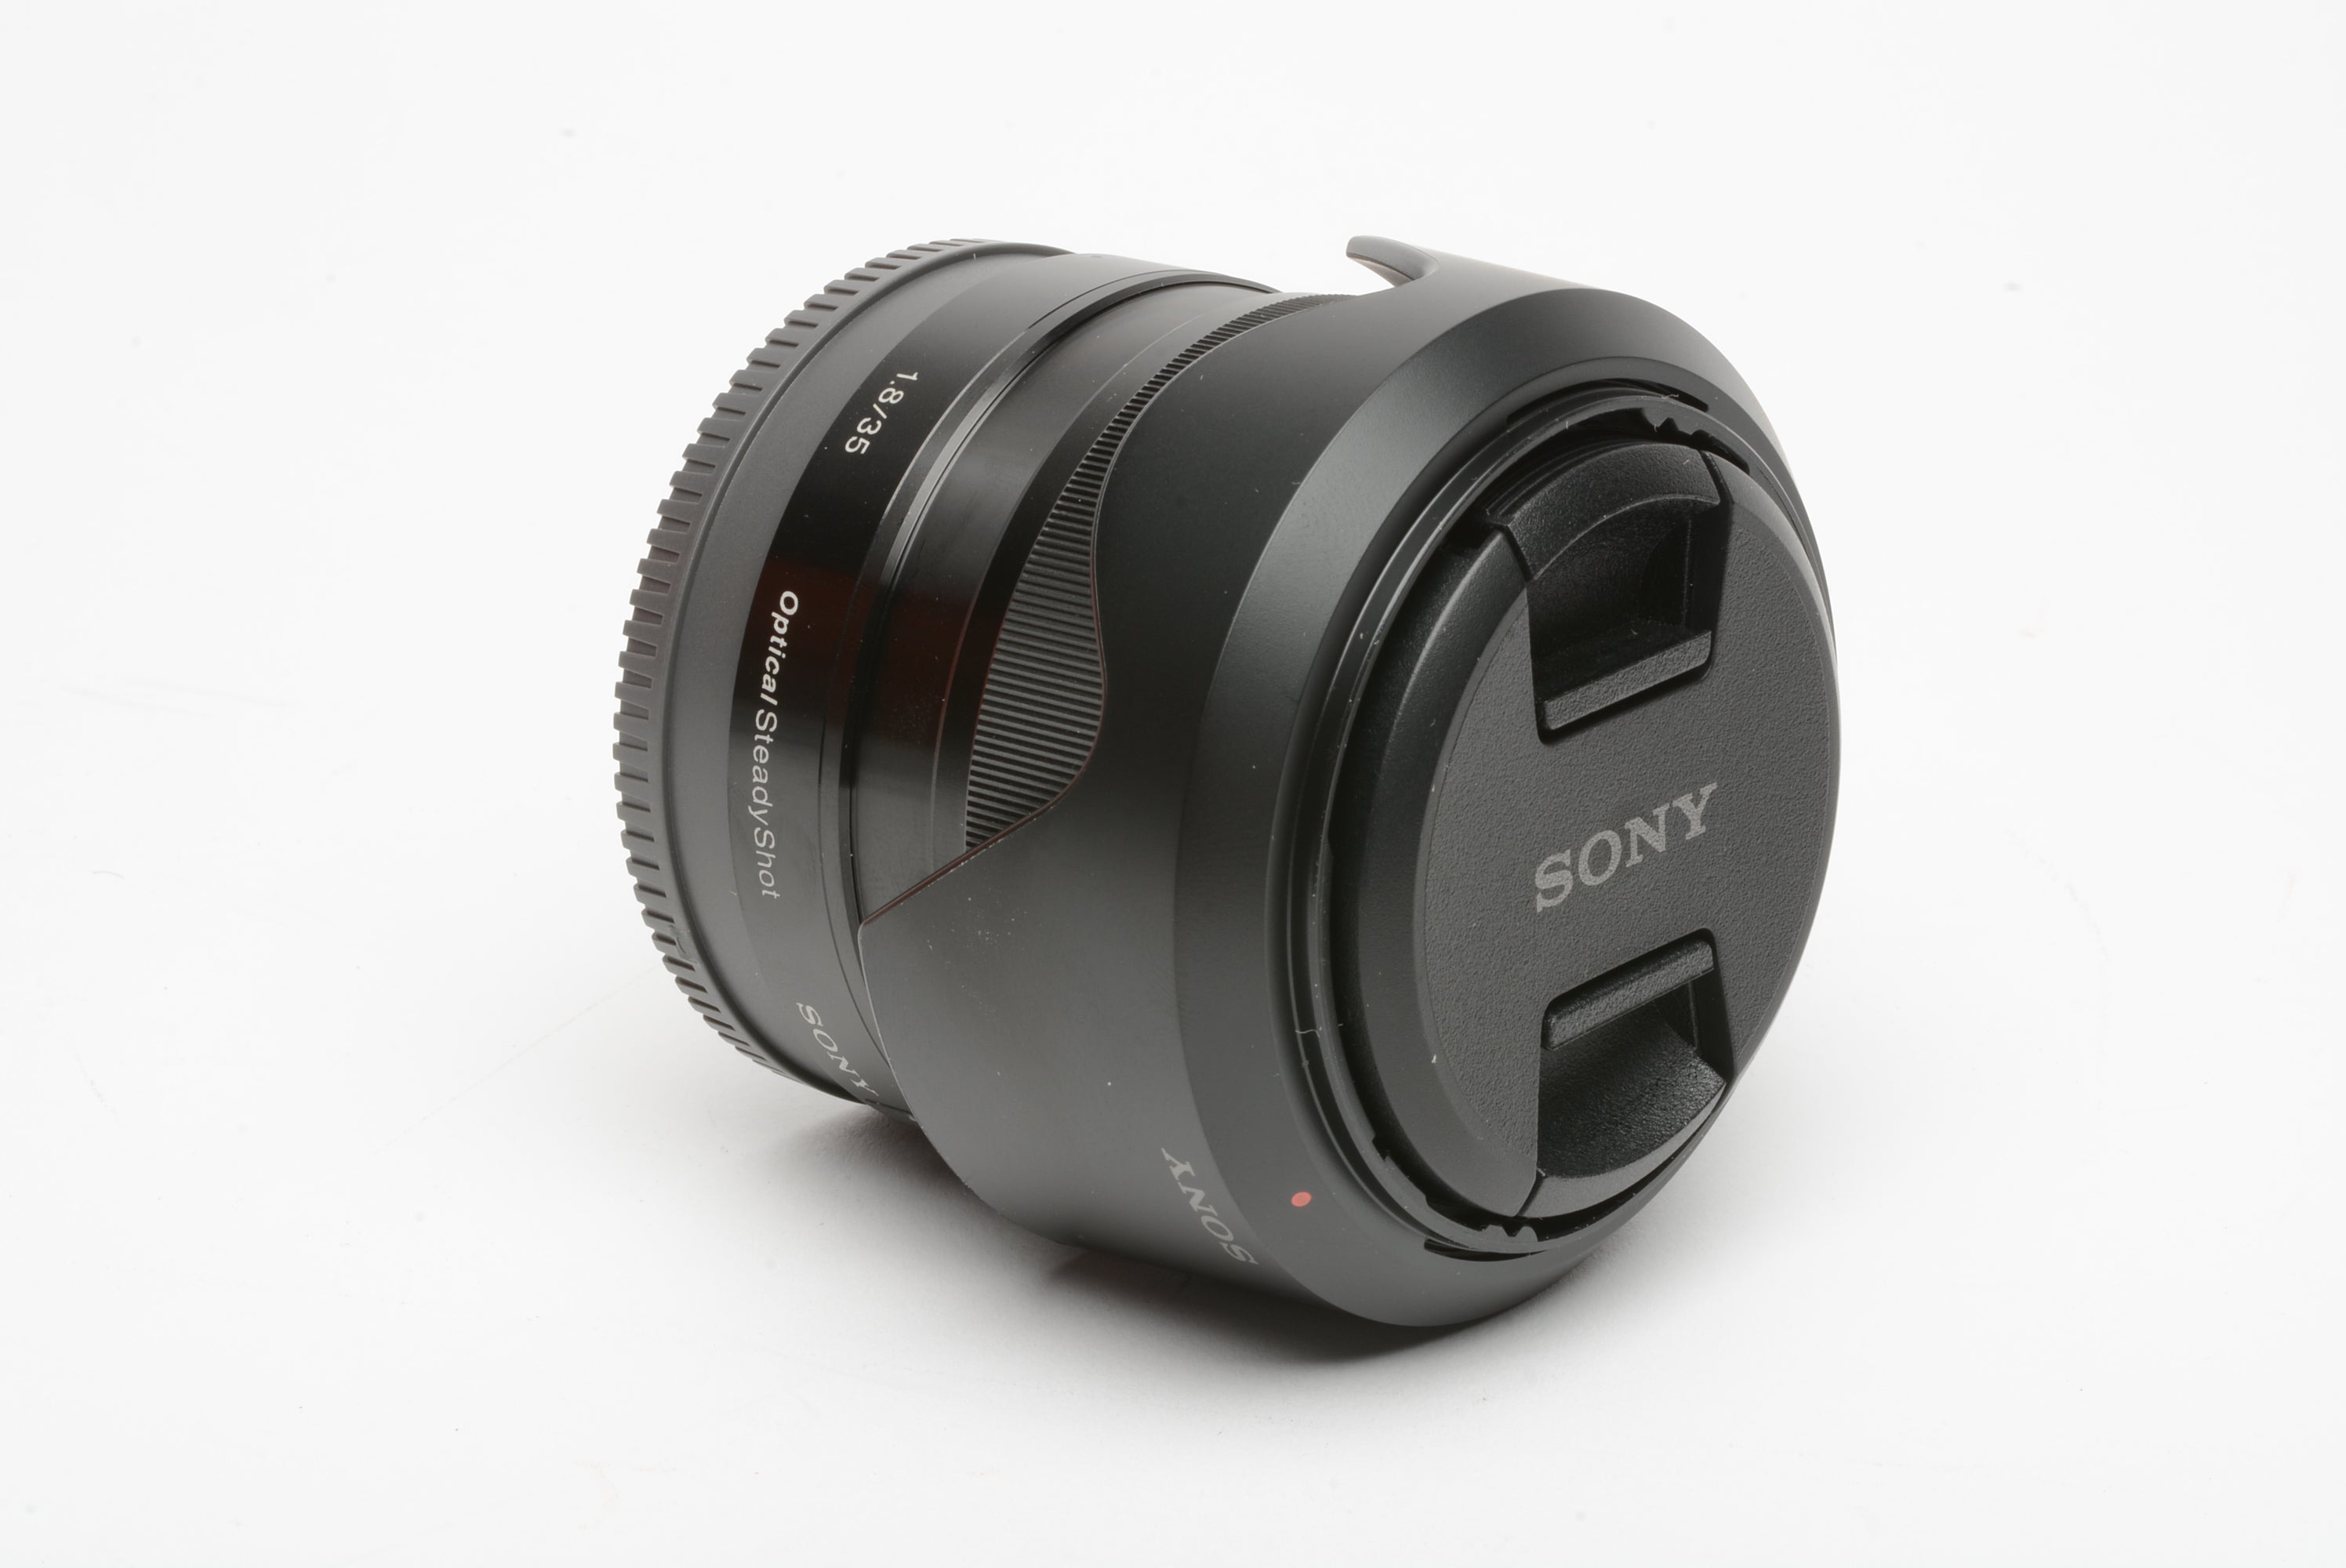 Sony E 35mm f/1.8 OSS Lens - SEL35F18 - FAST FREE 2-3 BUSINESS DAY